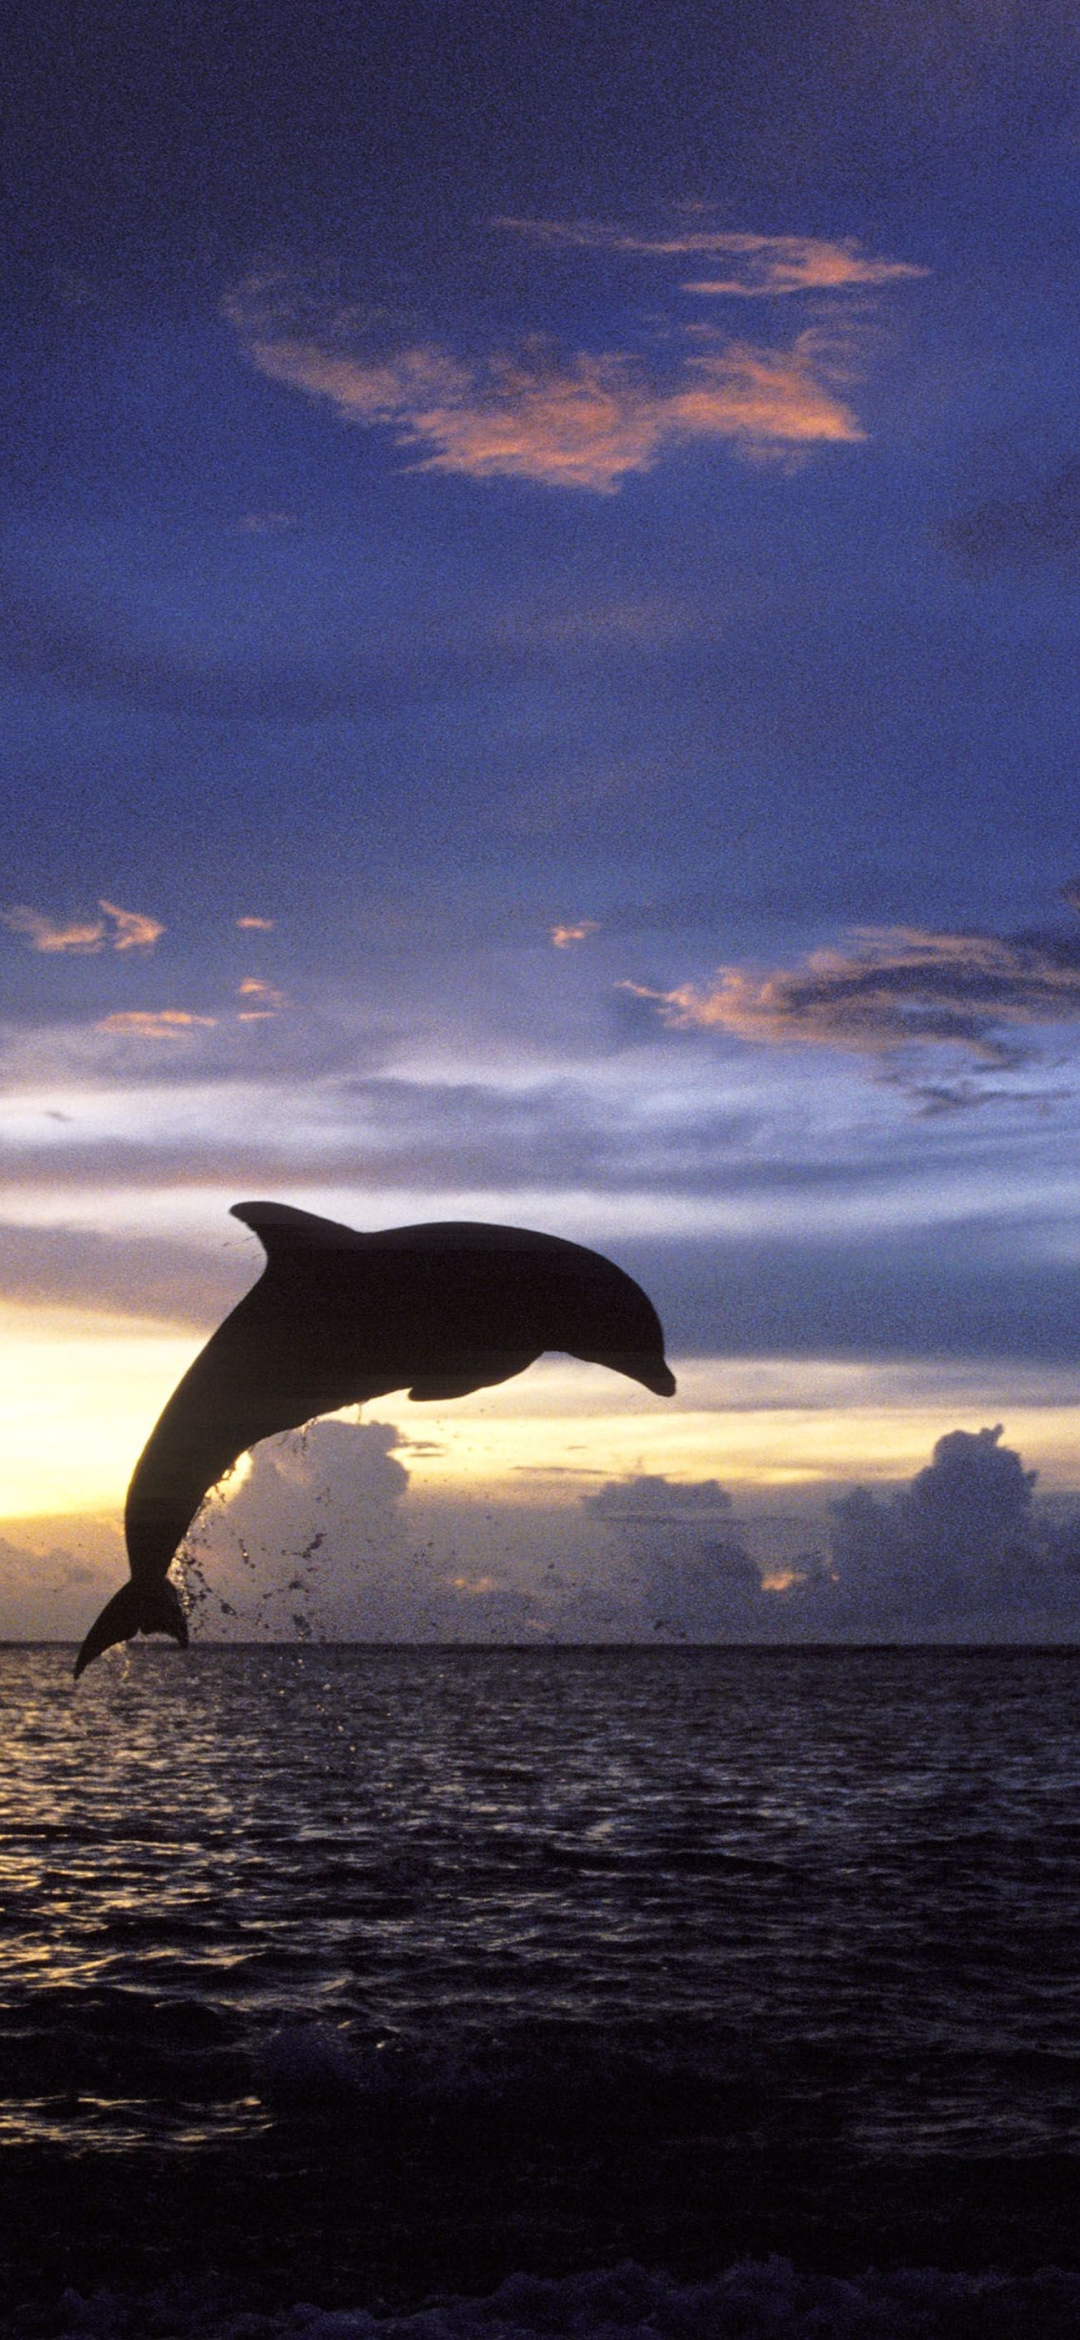 Wallpaper  1920x1200 px dolphin drops ocean sunset 1920x1200   CoolWallpapers  1656069  HD Wallpapers  WallHere